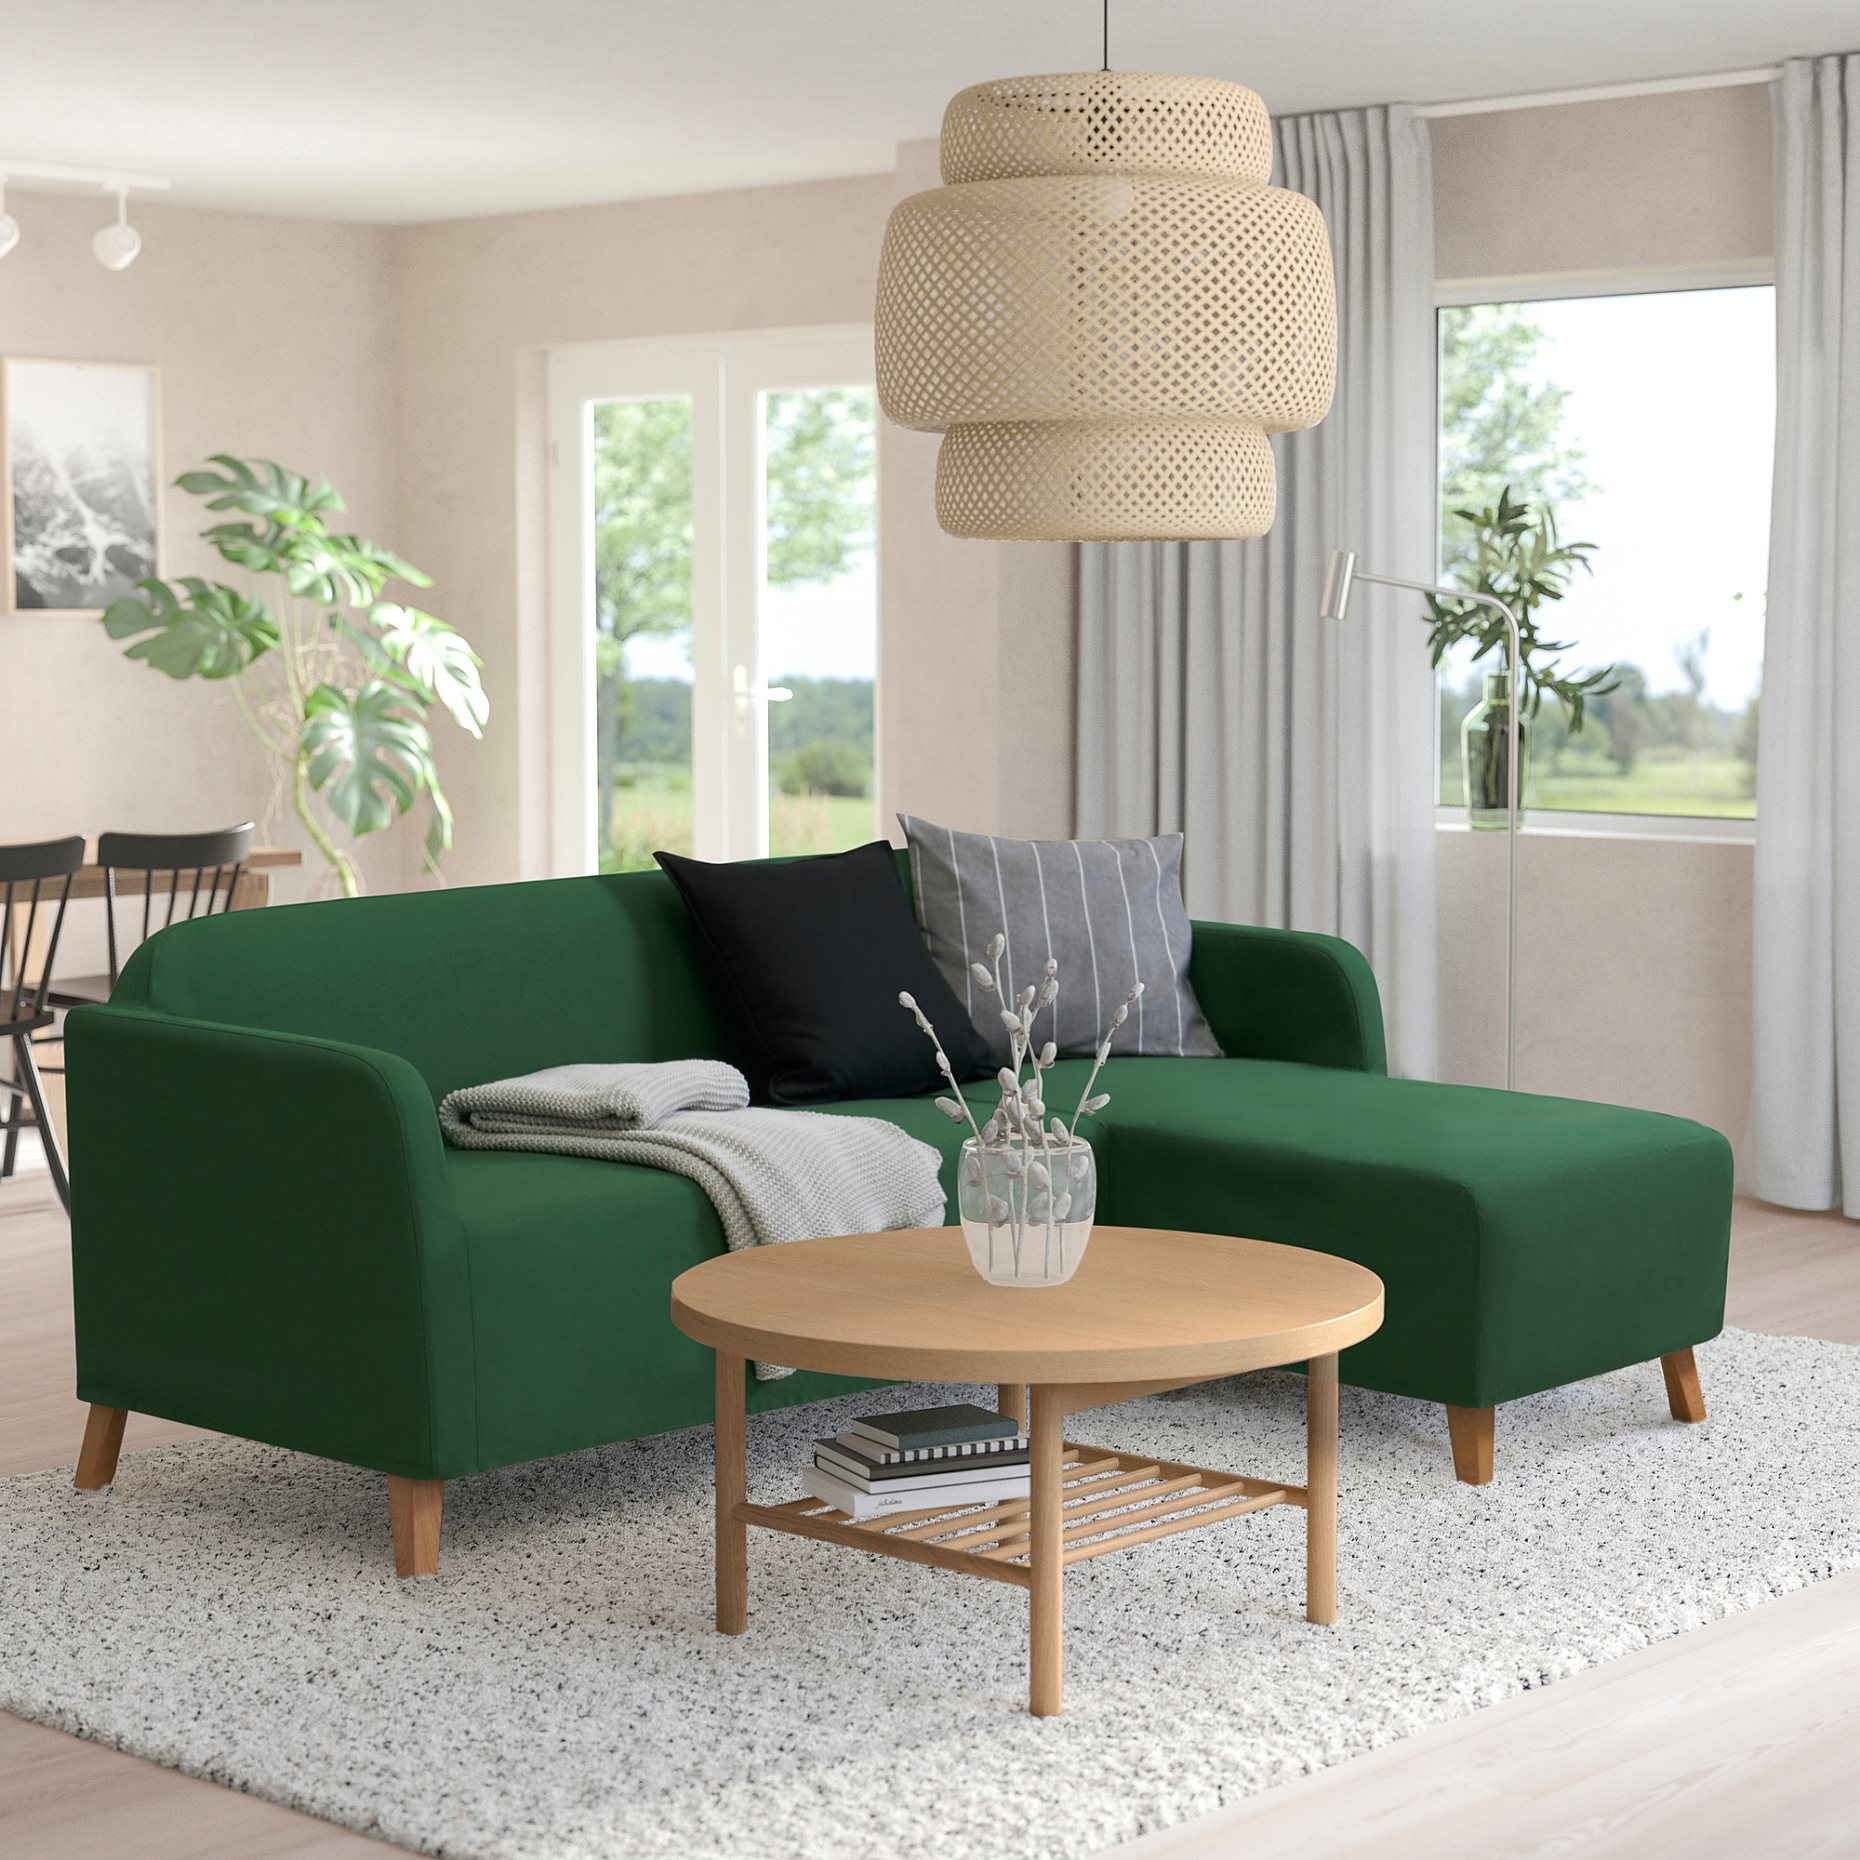 LINANÄS, sofa protector for 3-seat sofa with chaise longue, 405.644.03